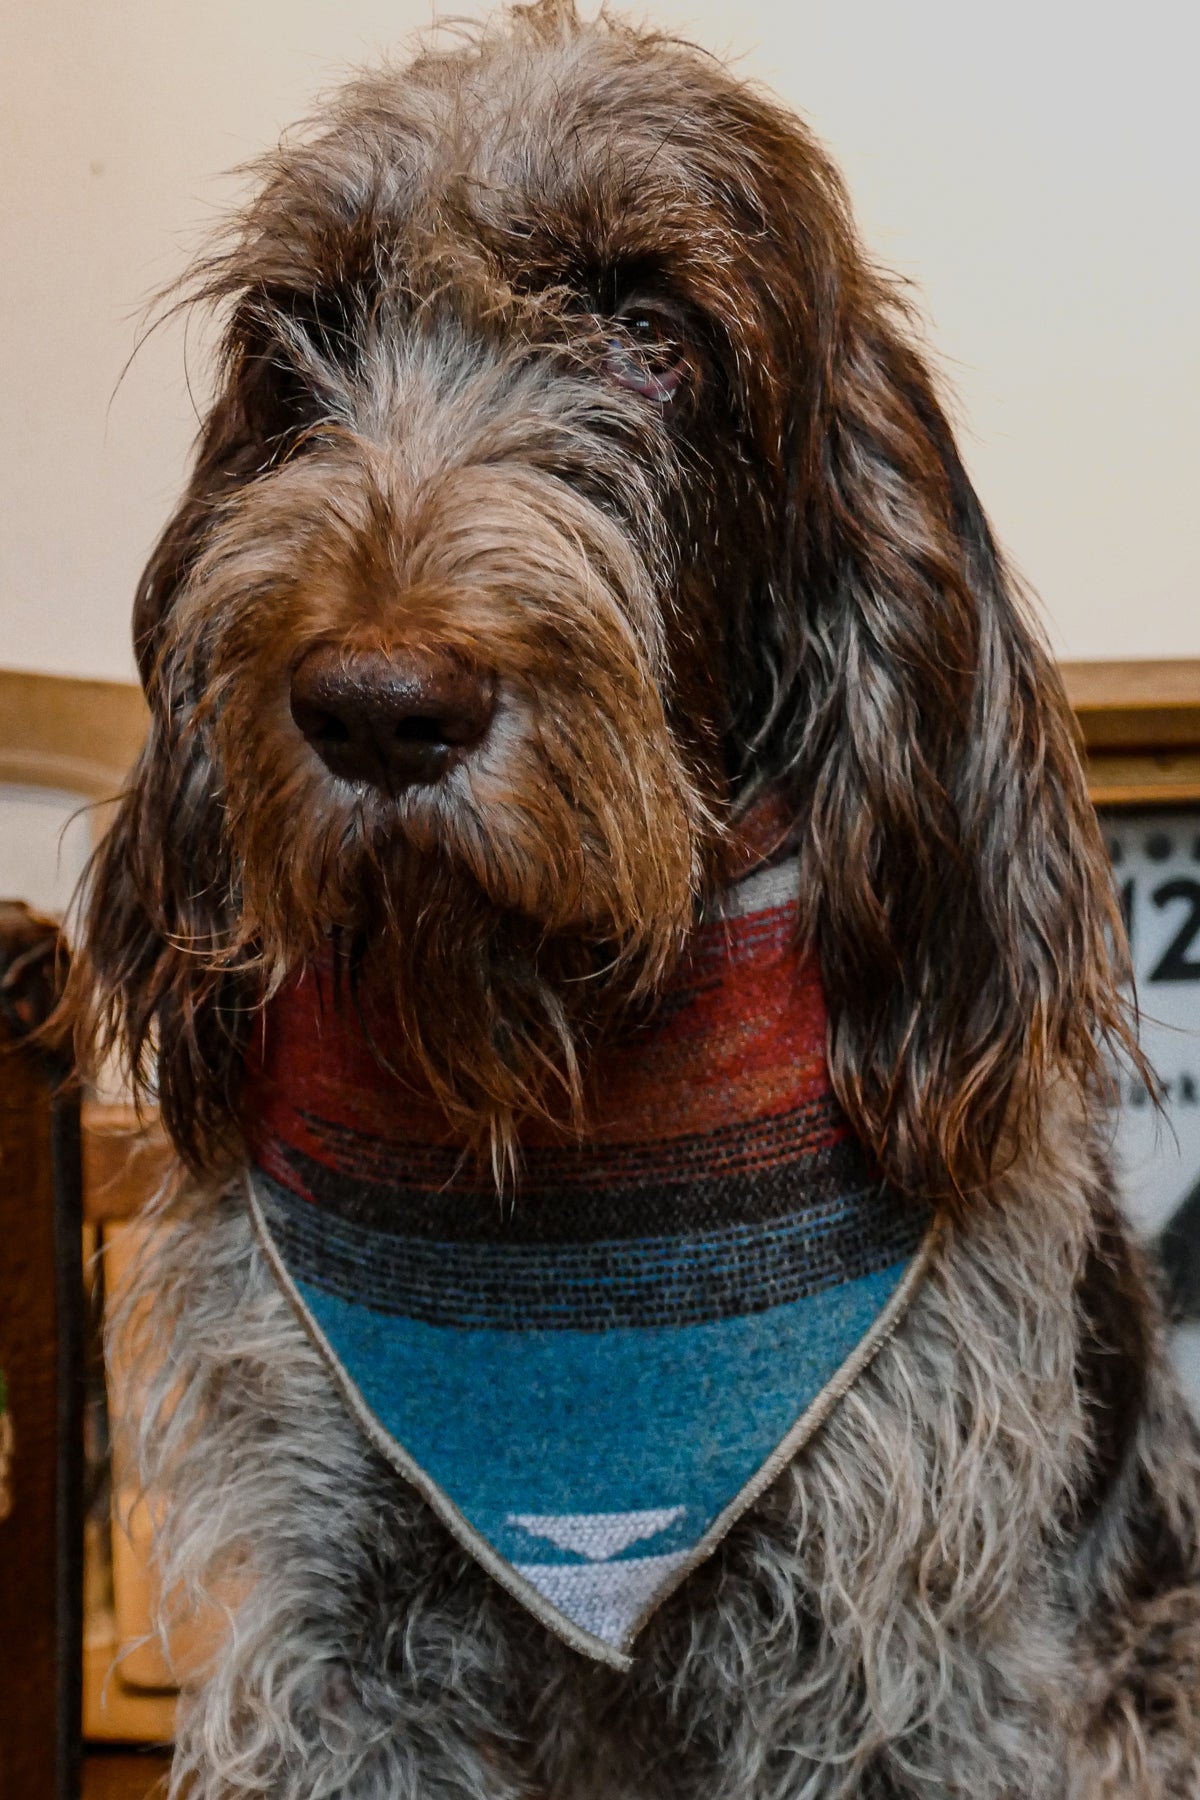 The Rugged Society - Wool Neckerchief with Native Pattern